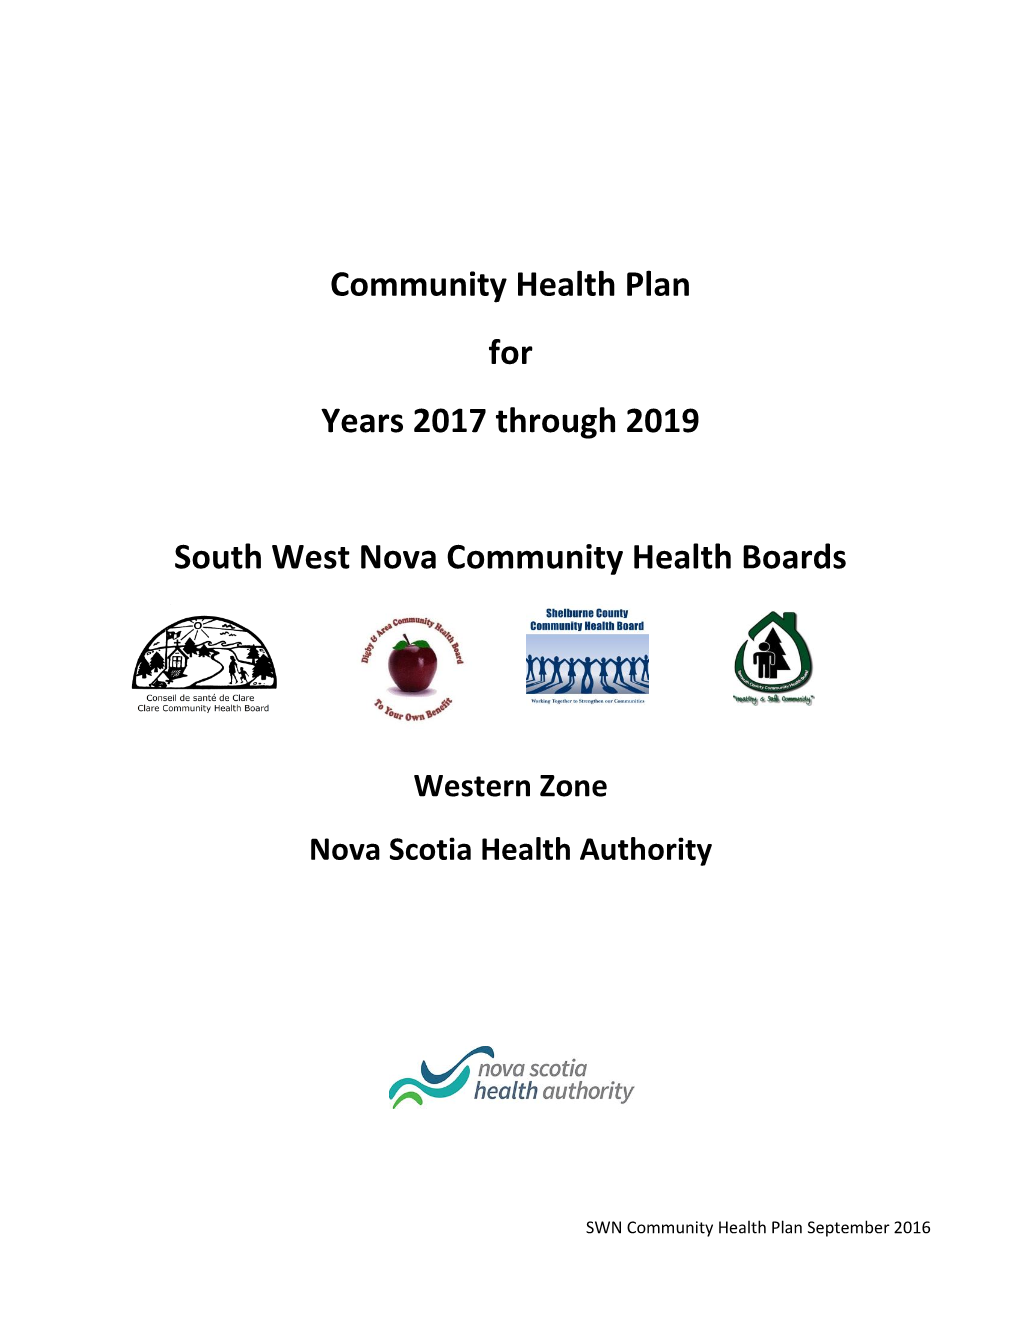 Community Health Plan for Years 2017 Through 2019 South West